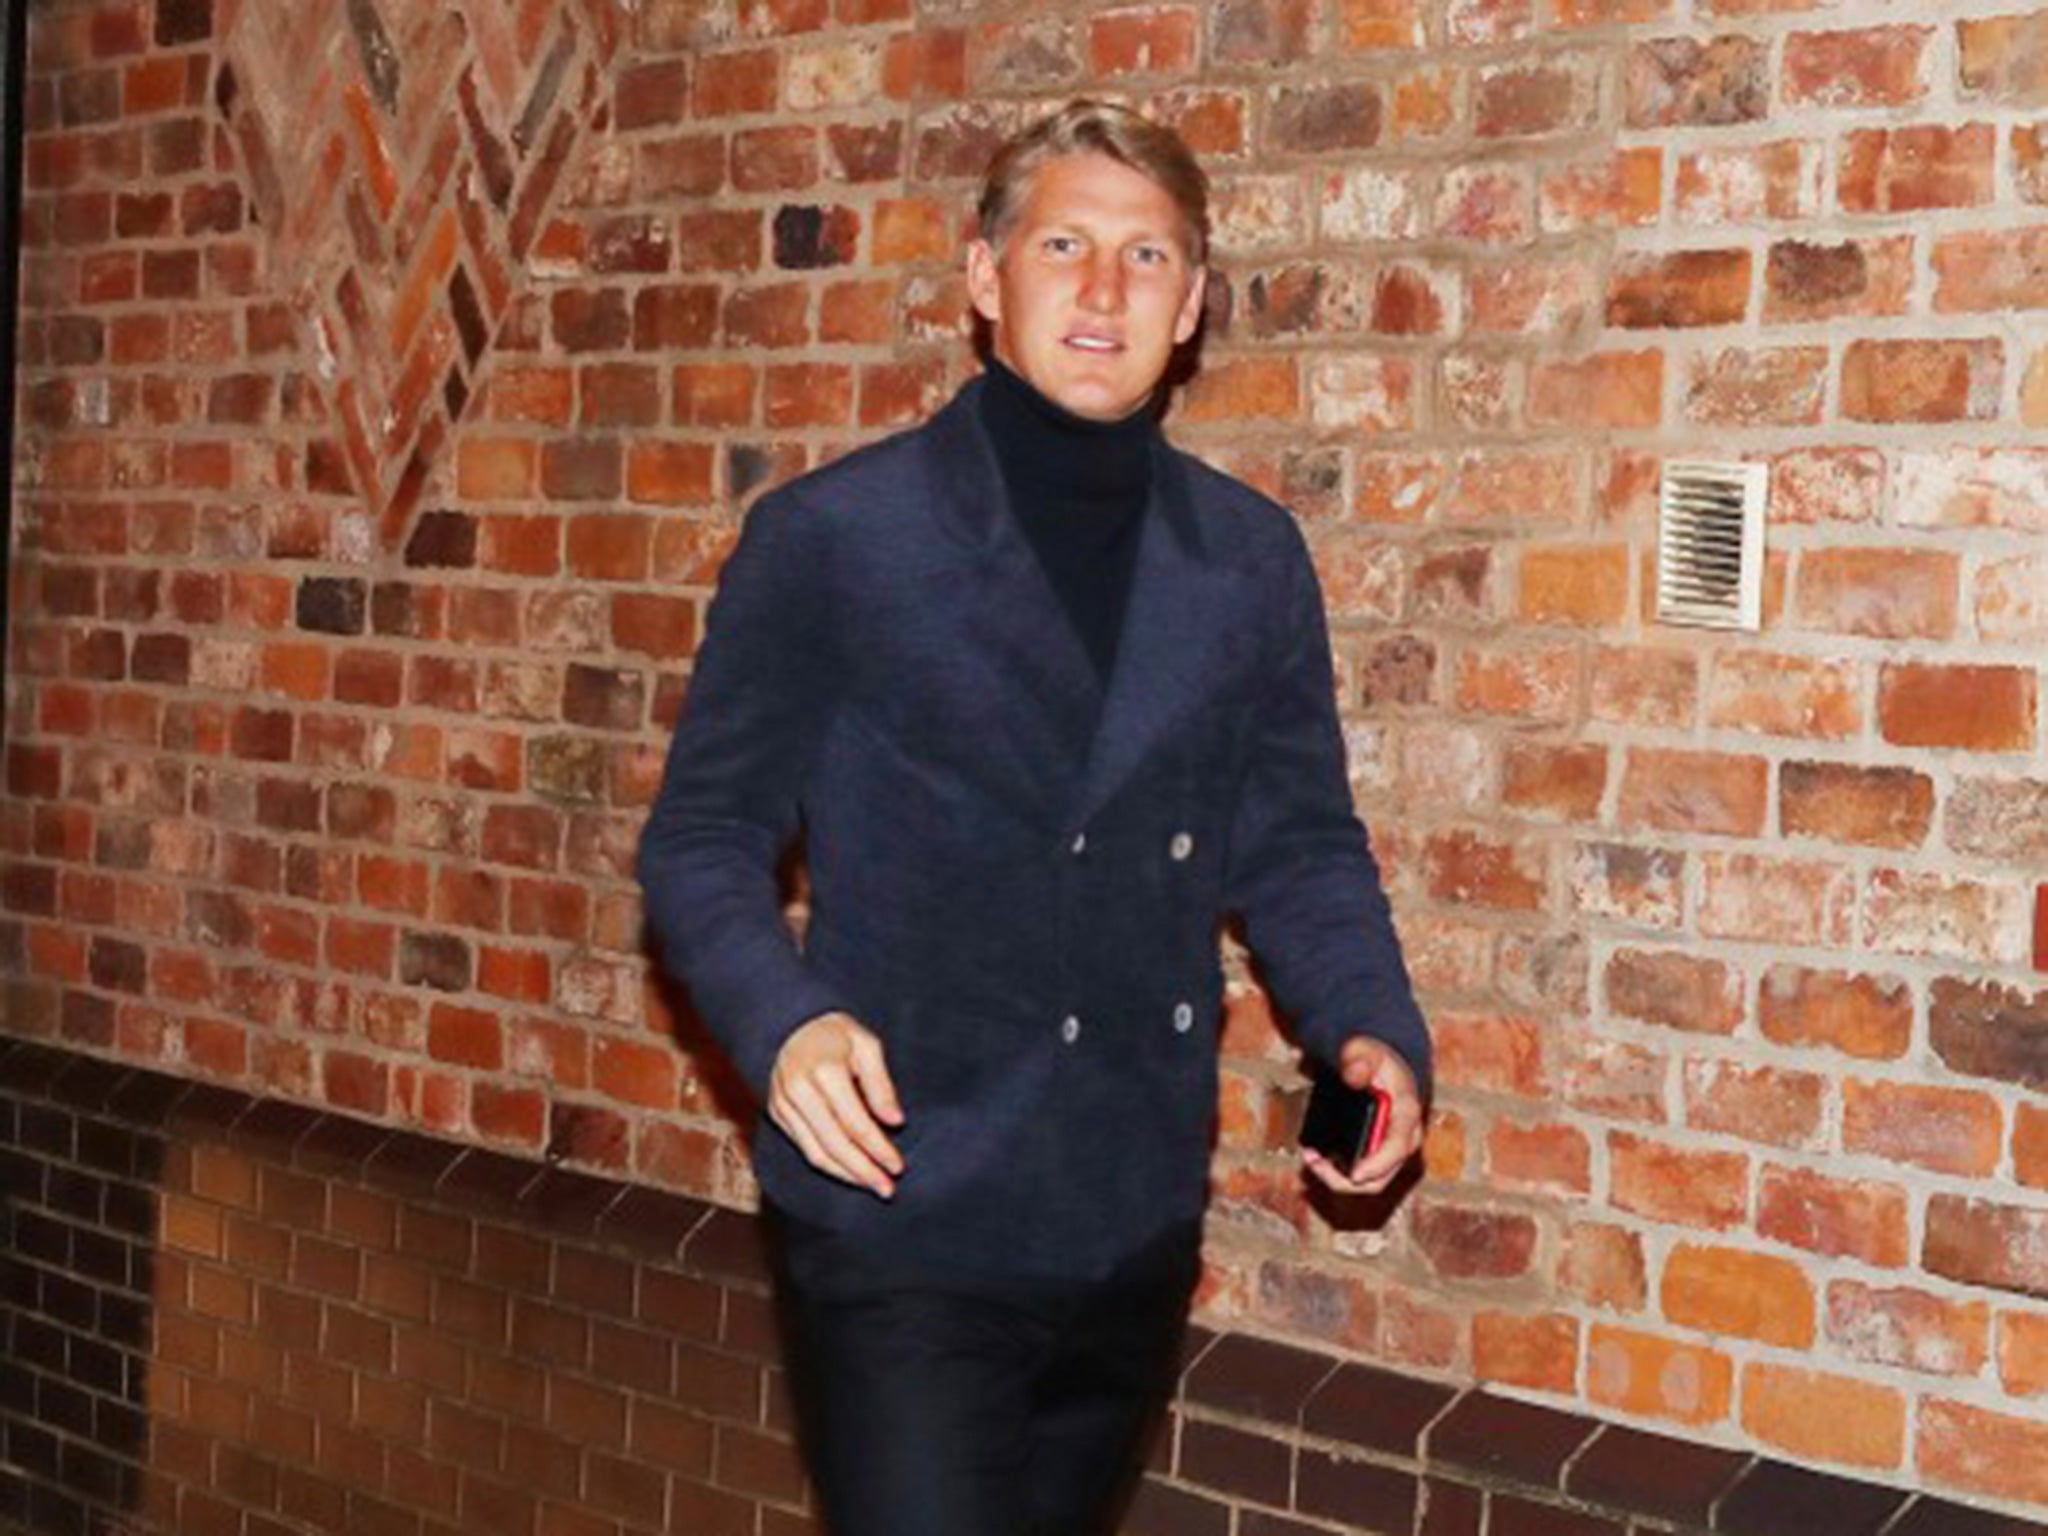 Schweinsteiger photographed outside the Piccolino restaurant in Hale